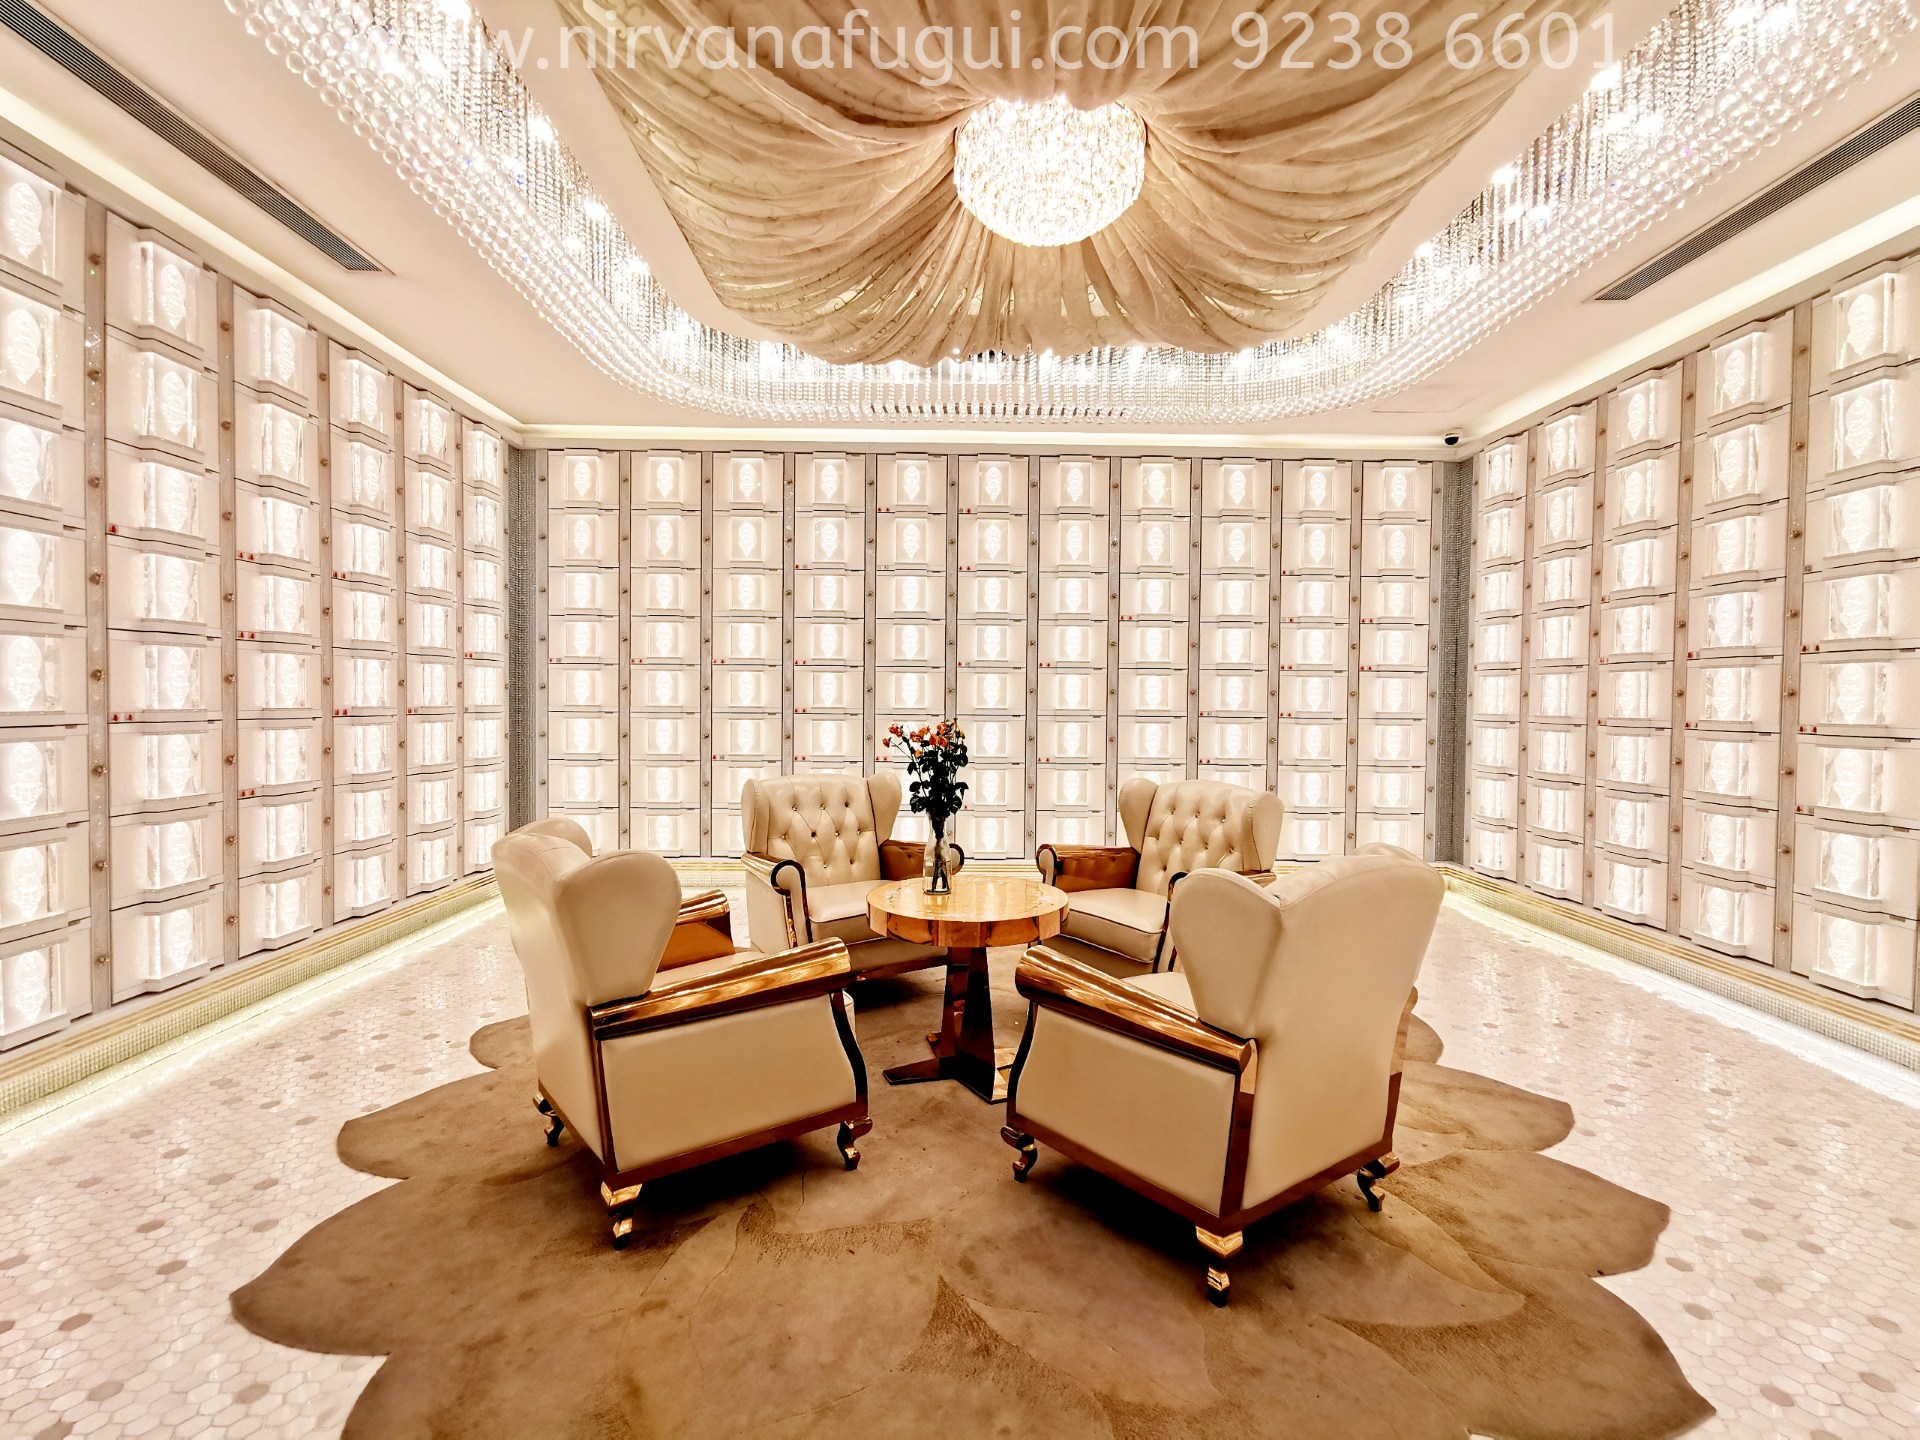 This is the premium columbarium, built with shiny white environment. Many wealthy people who like brightness will prefer this columbarium.